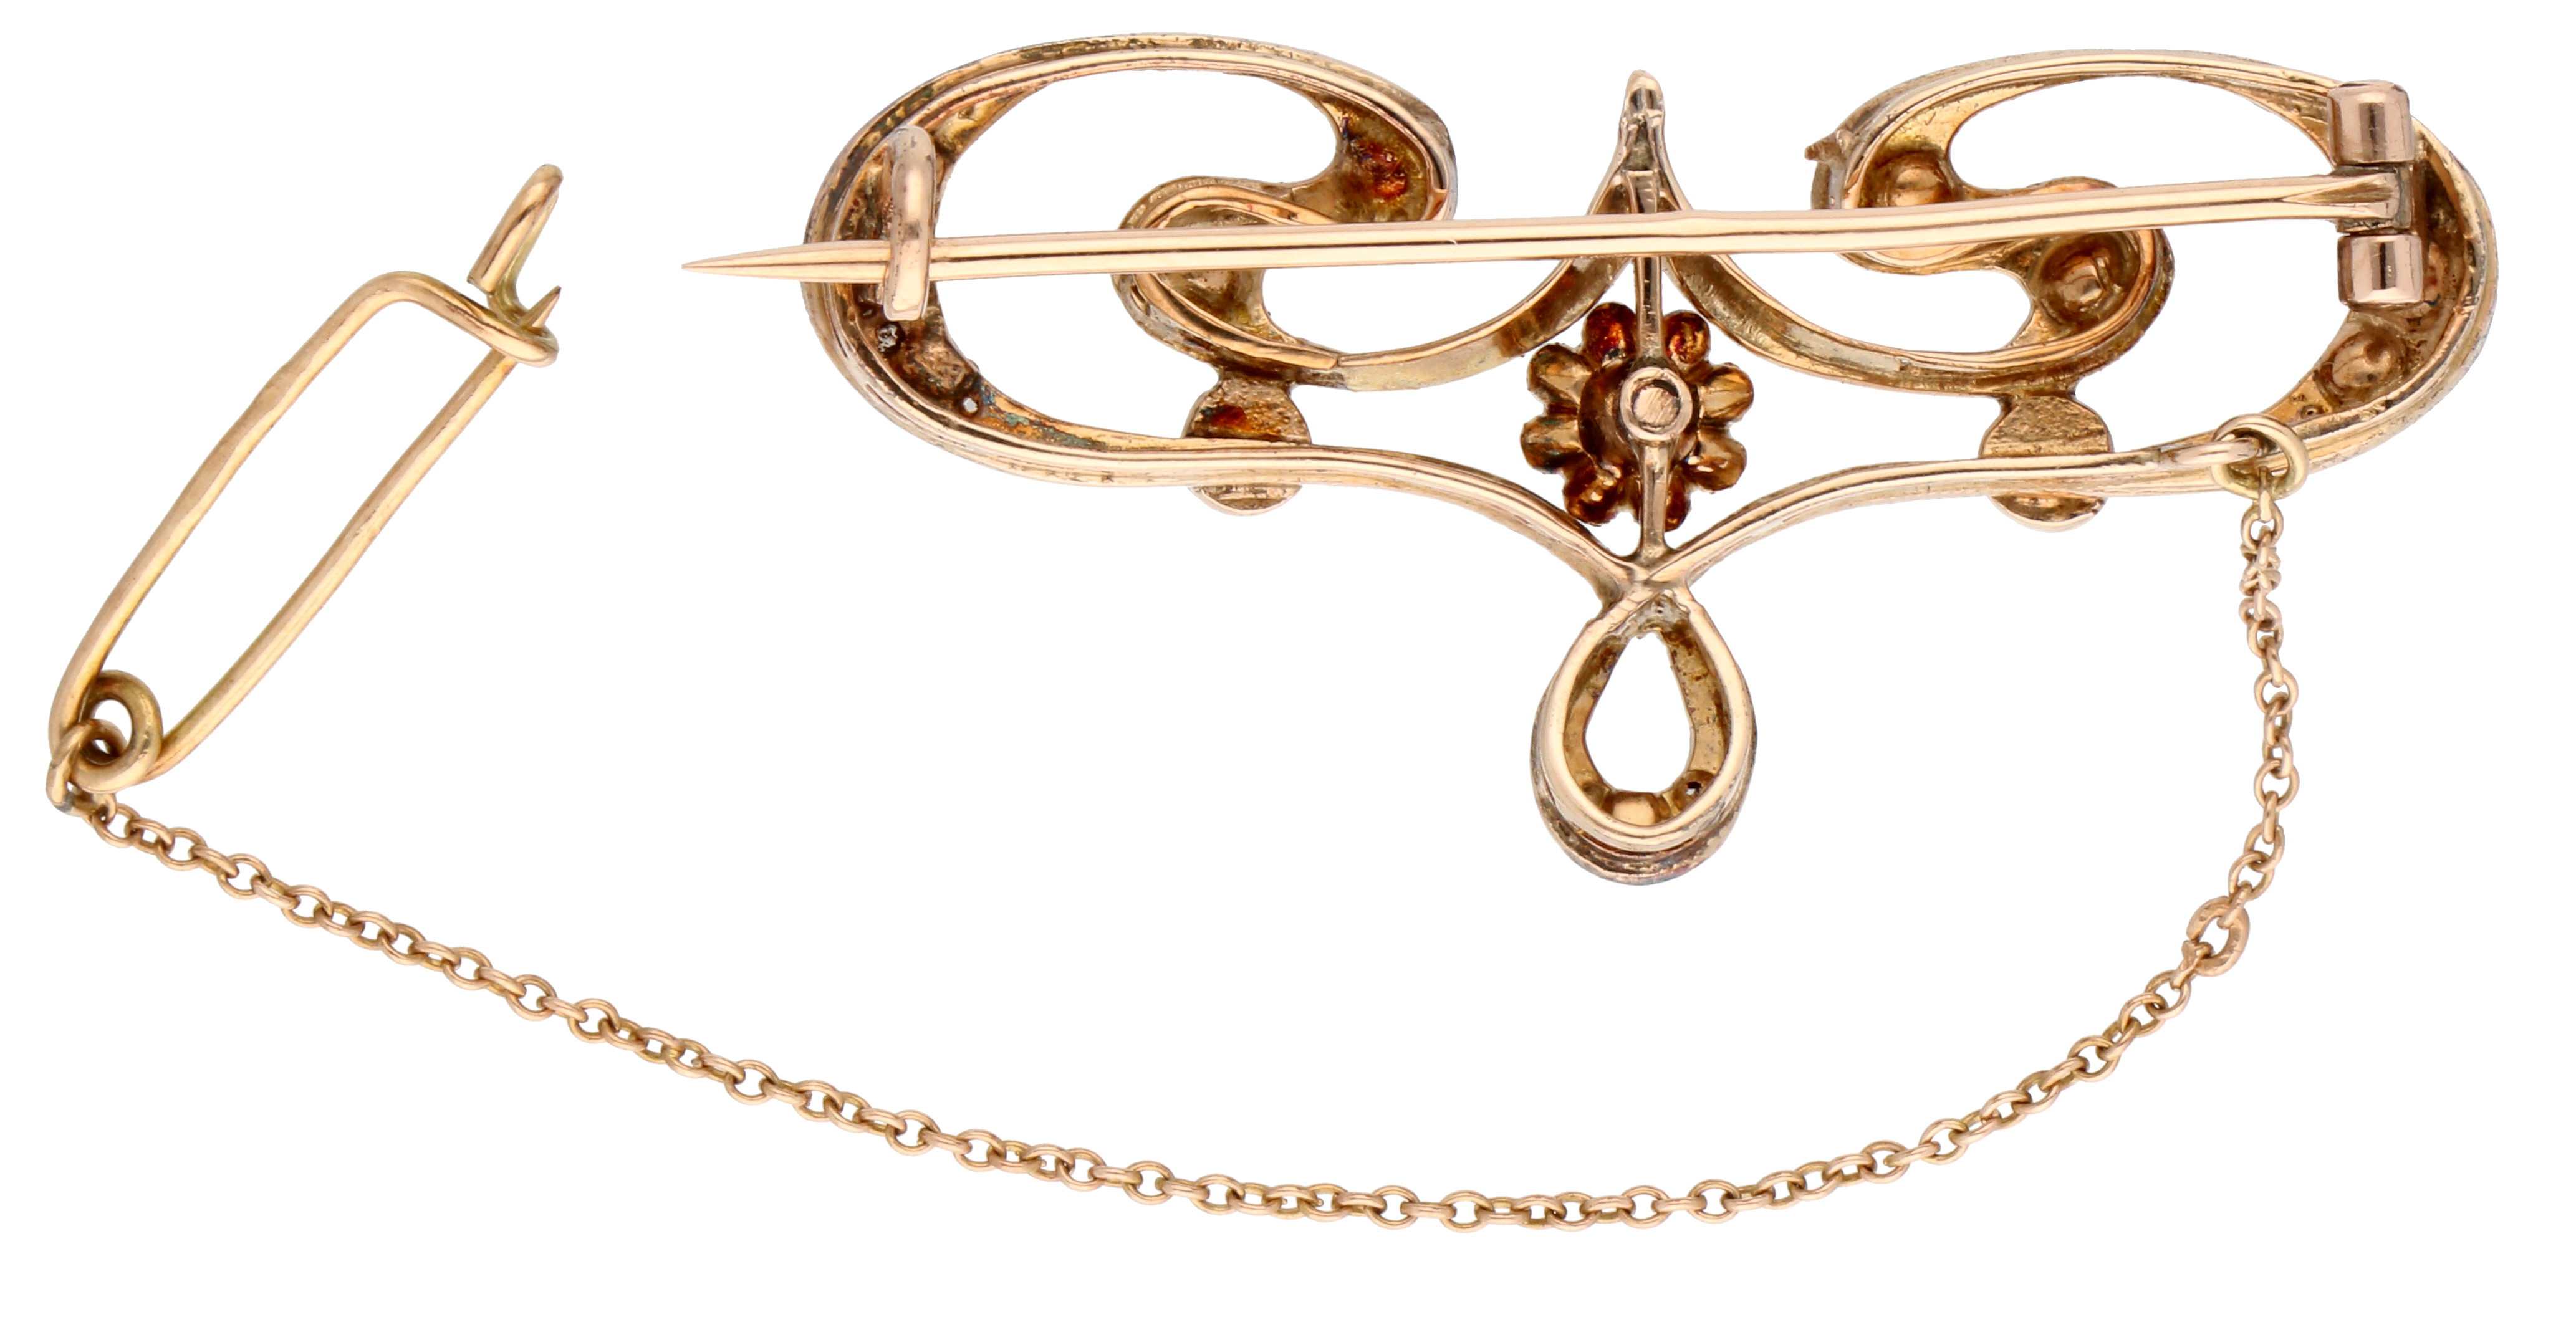 No Reserve - 14K Yellow Gold Art Nouveau brooch with rose diamond. - Image 2 of 2